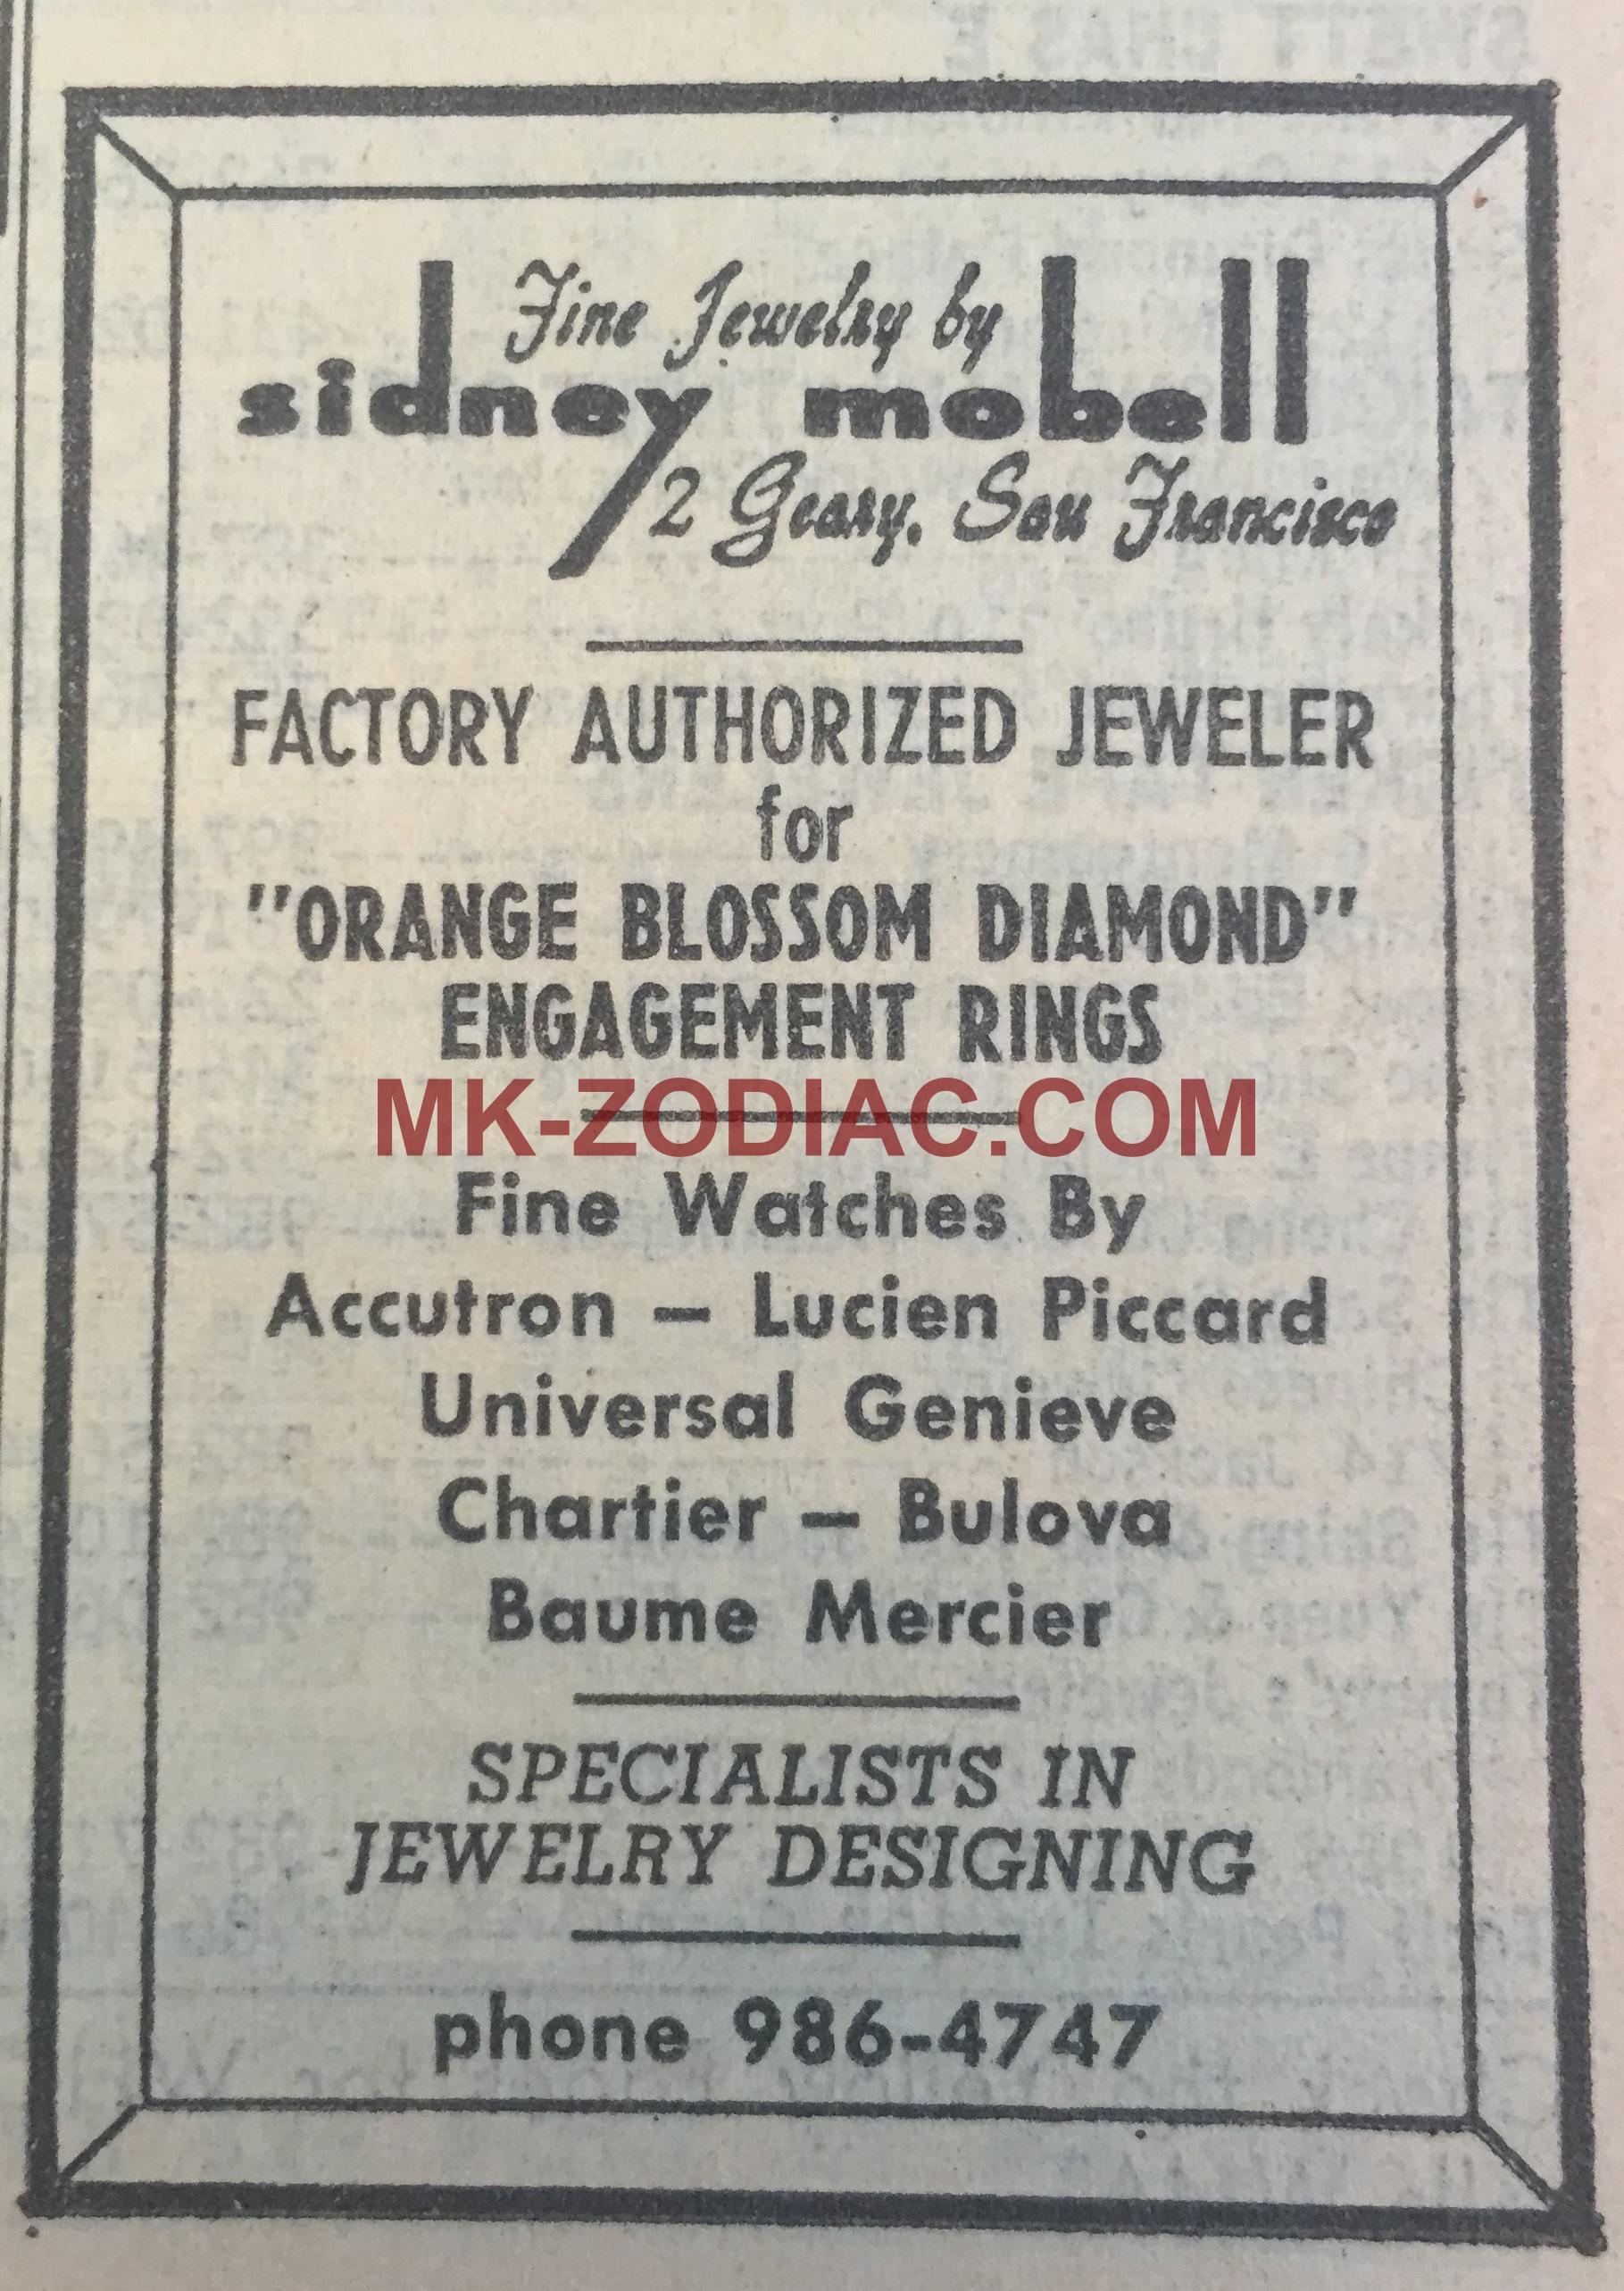 Sidney Mobell telephone directory ad